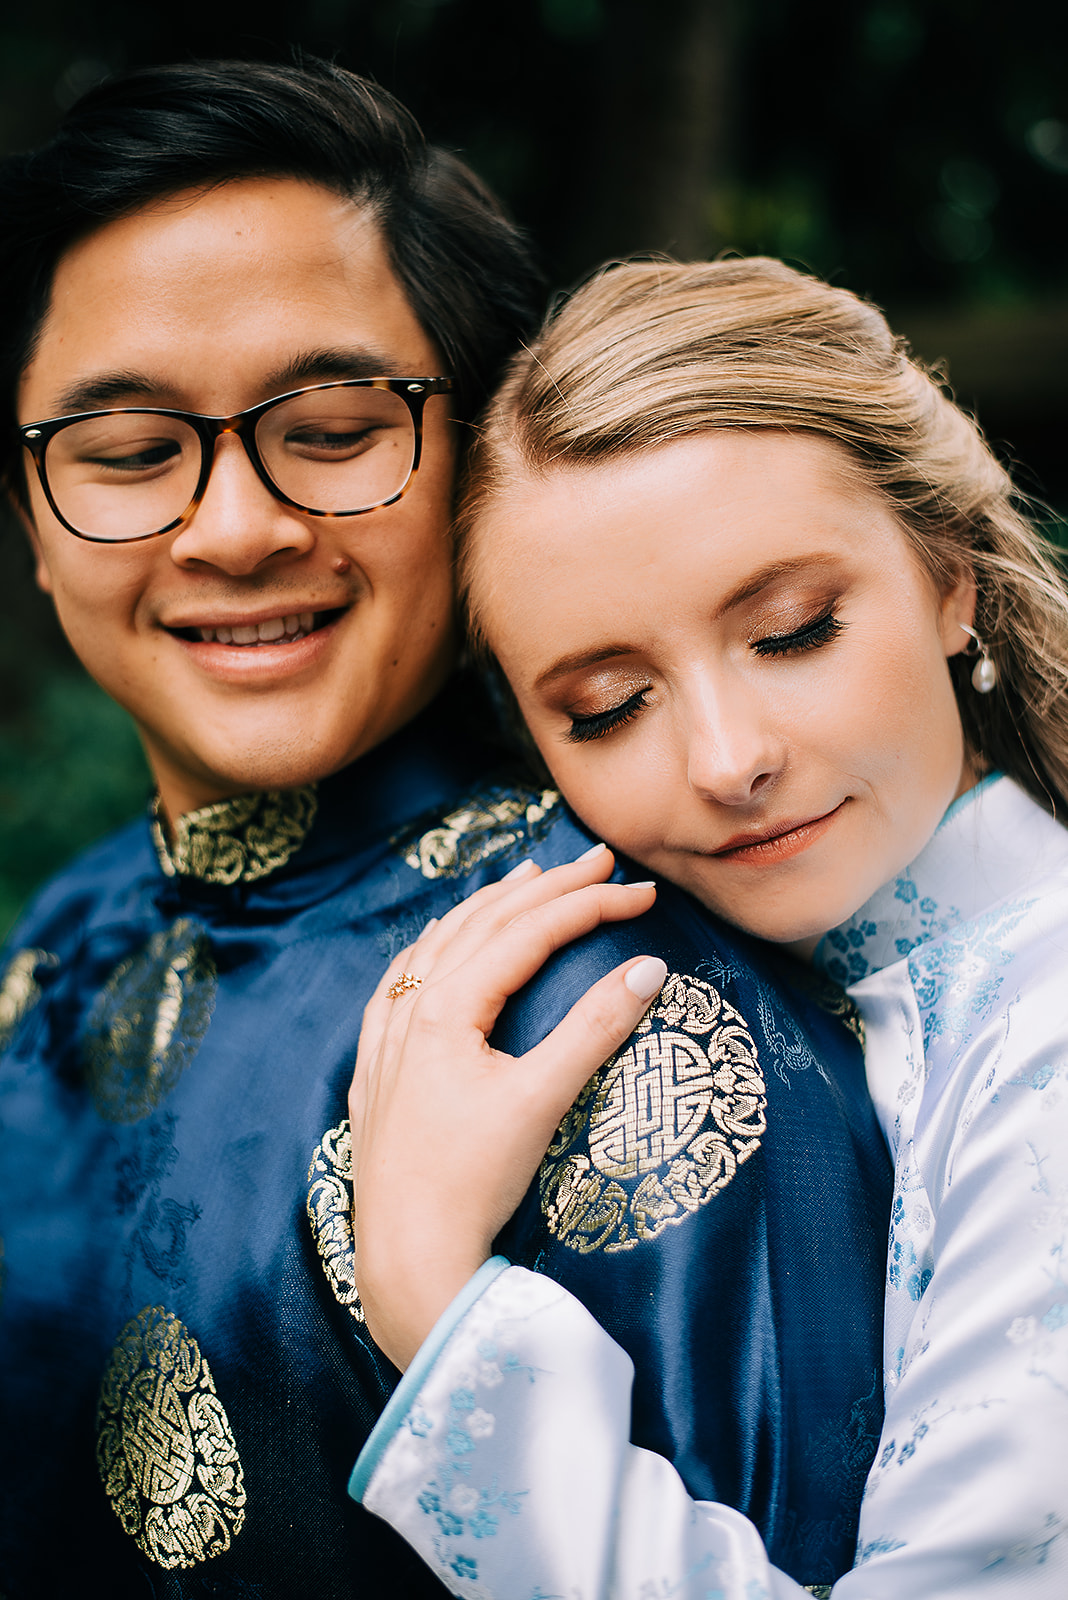 Interracial couple photographed in traditional ao dai attire at engagement session at Kubota garden in Seattle